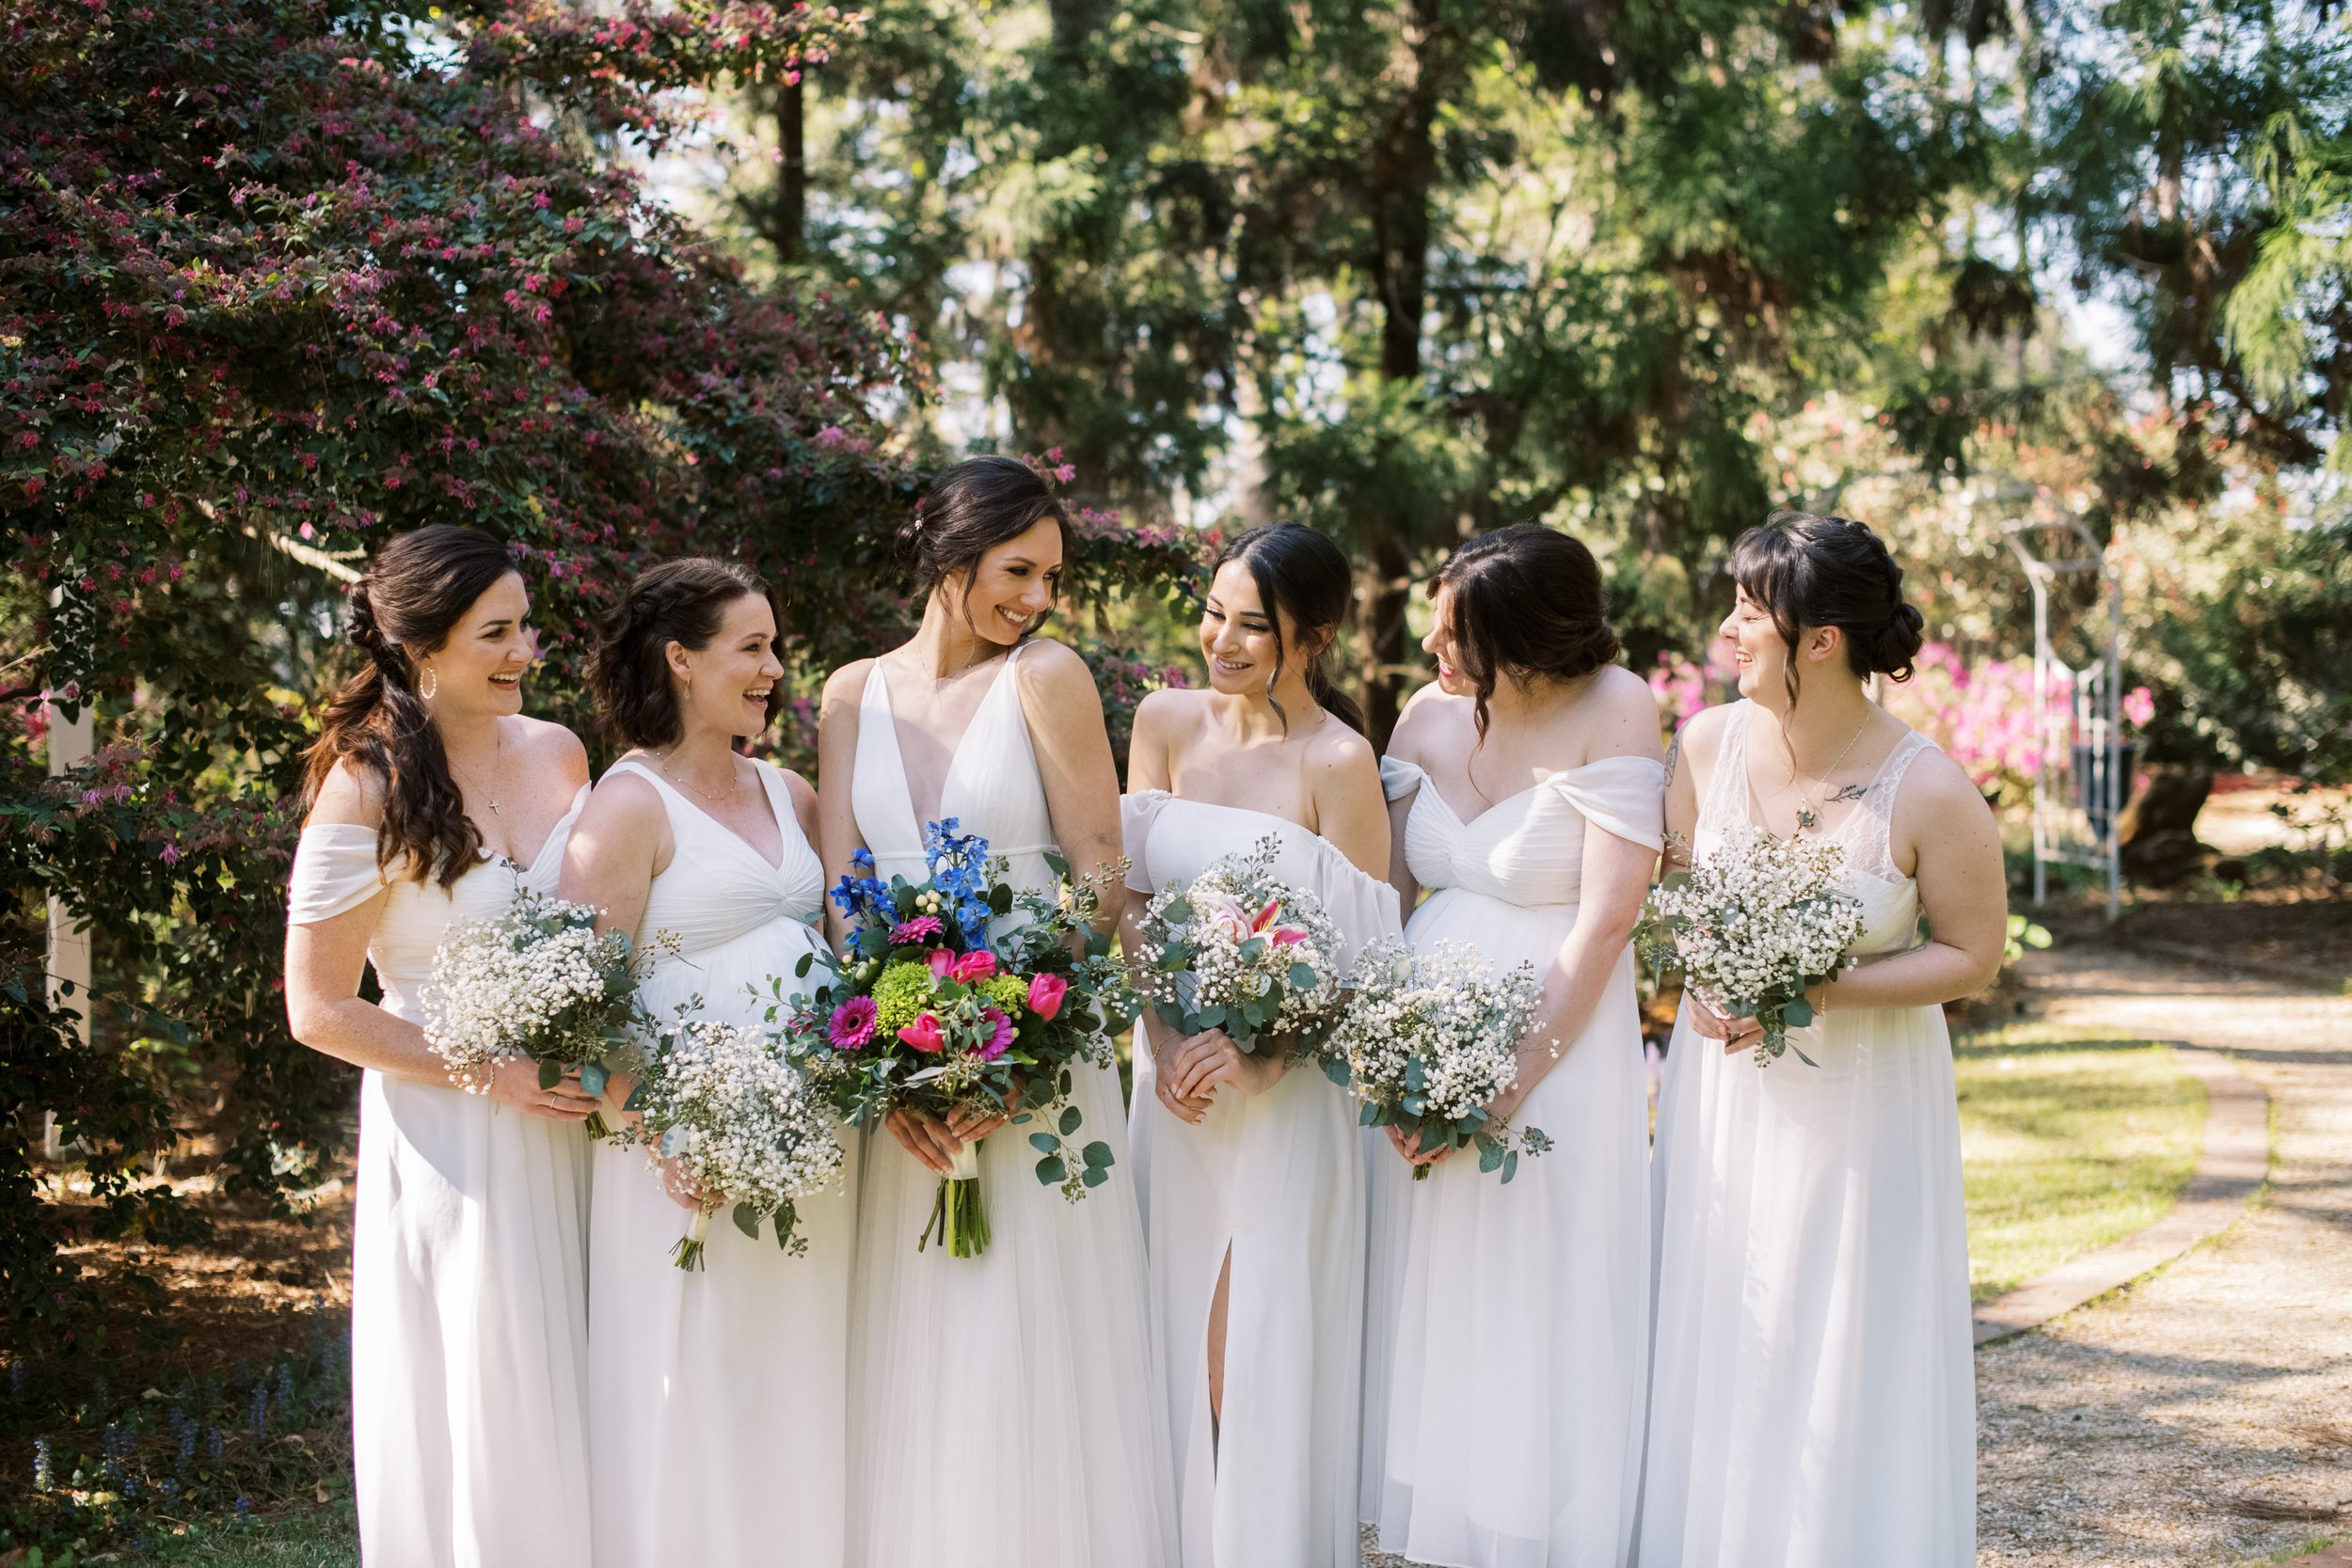 Bridesmaids in White Dresses Smiling with Bride Cape Fear Botanical Garden Wedding Fancy This Photography